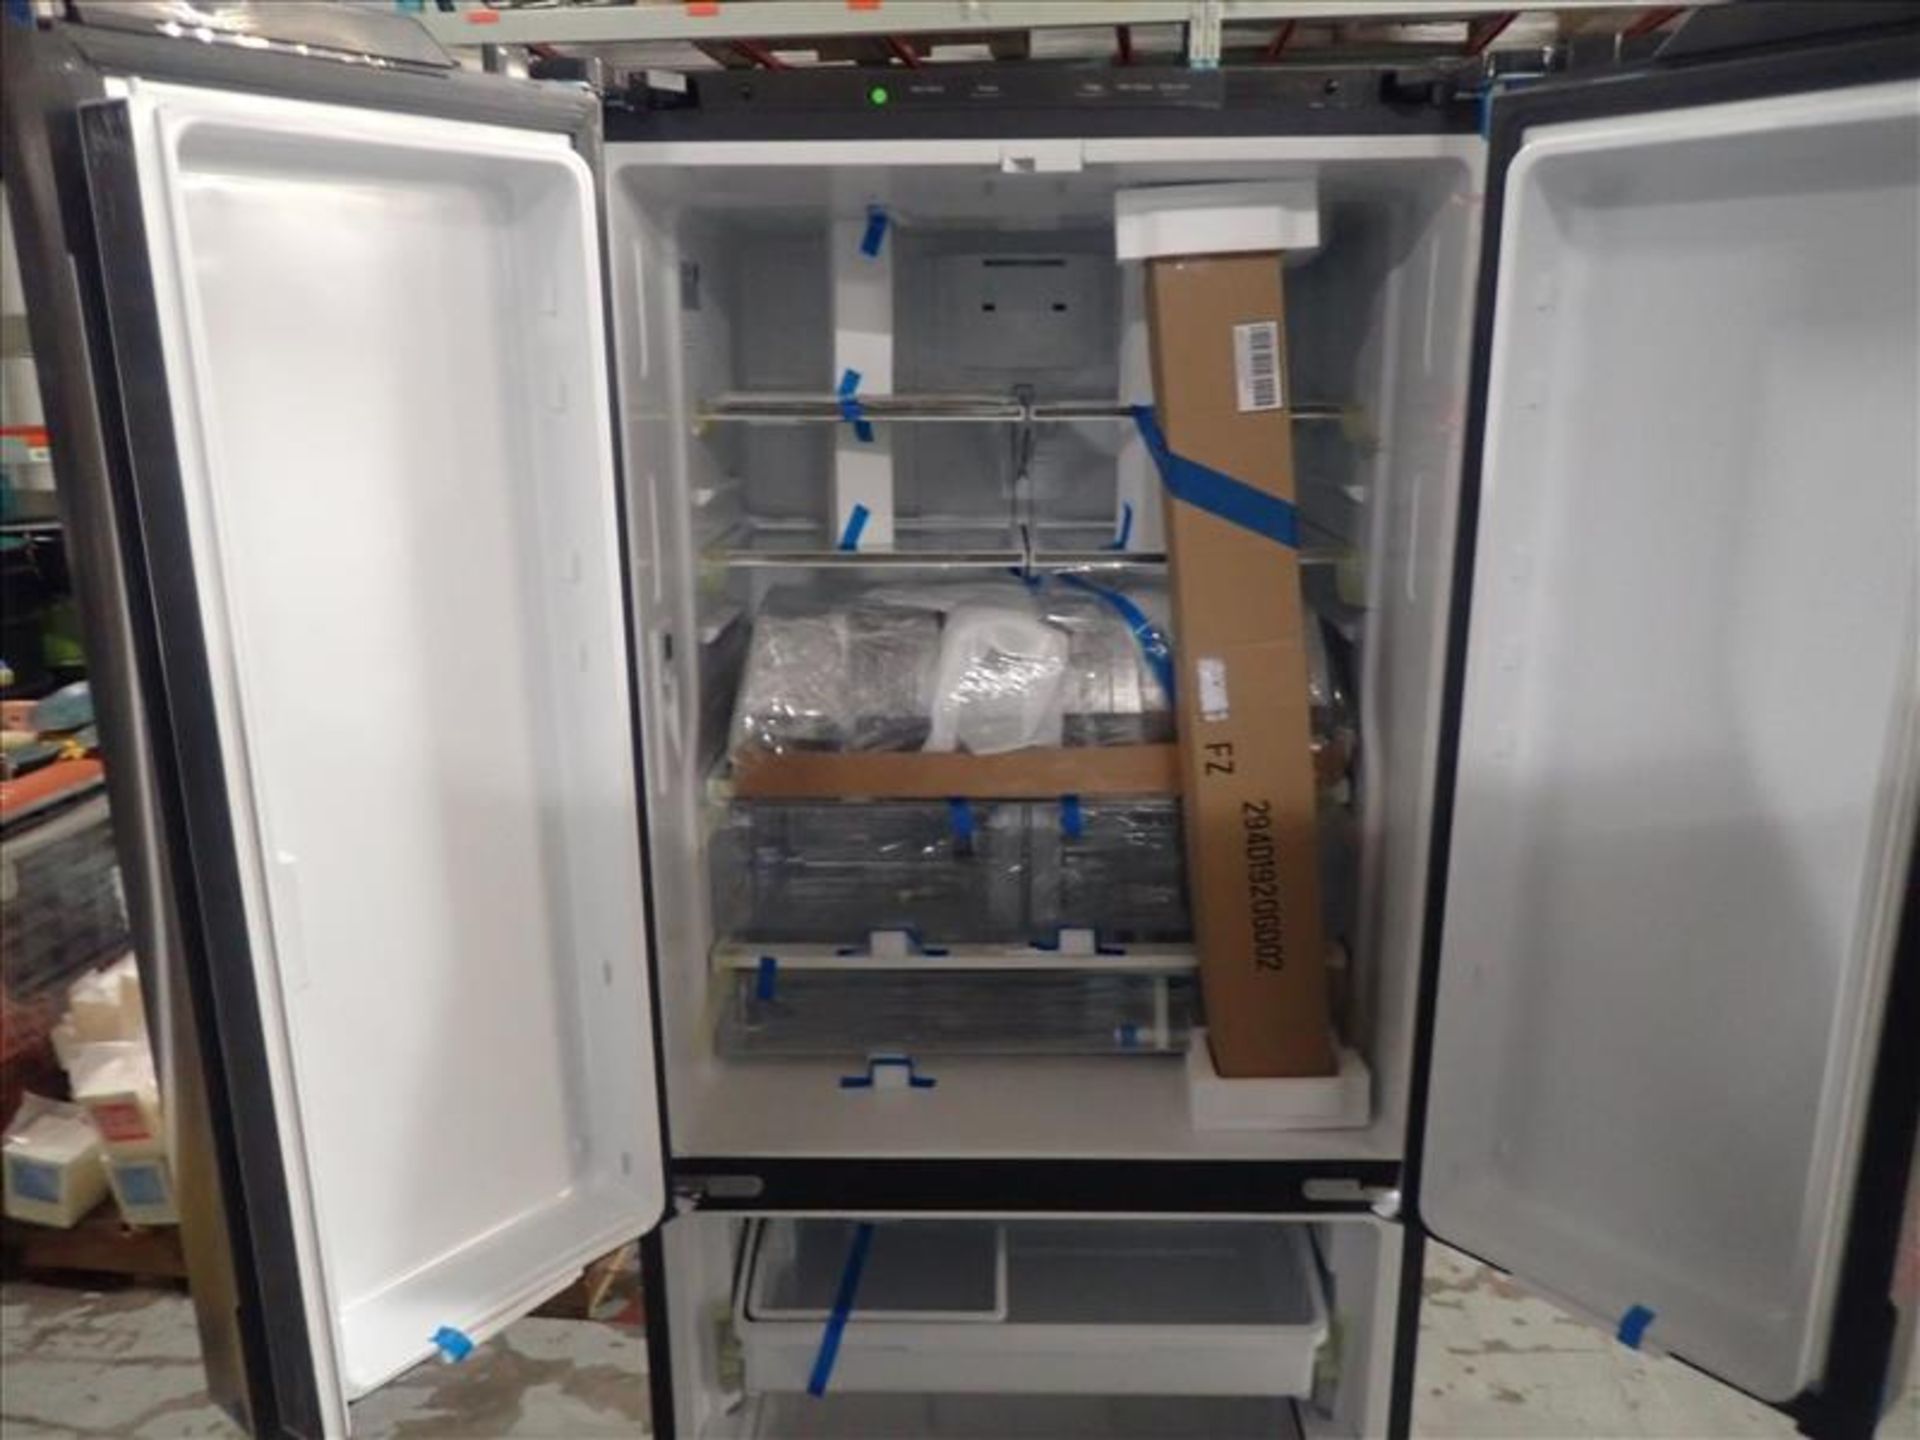 GE Cafe bottom freezer french door refrigerator, mod. CWE19SP2NWS1, stainless steel finish, 33 in. W - Image 3 of 5